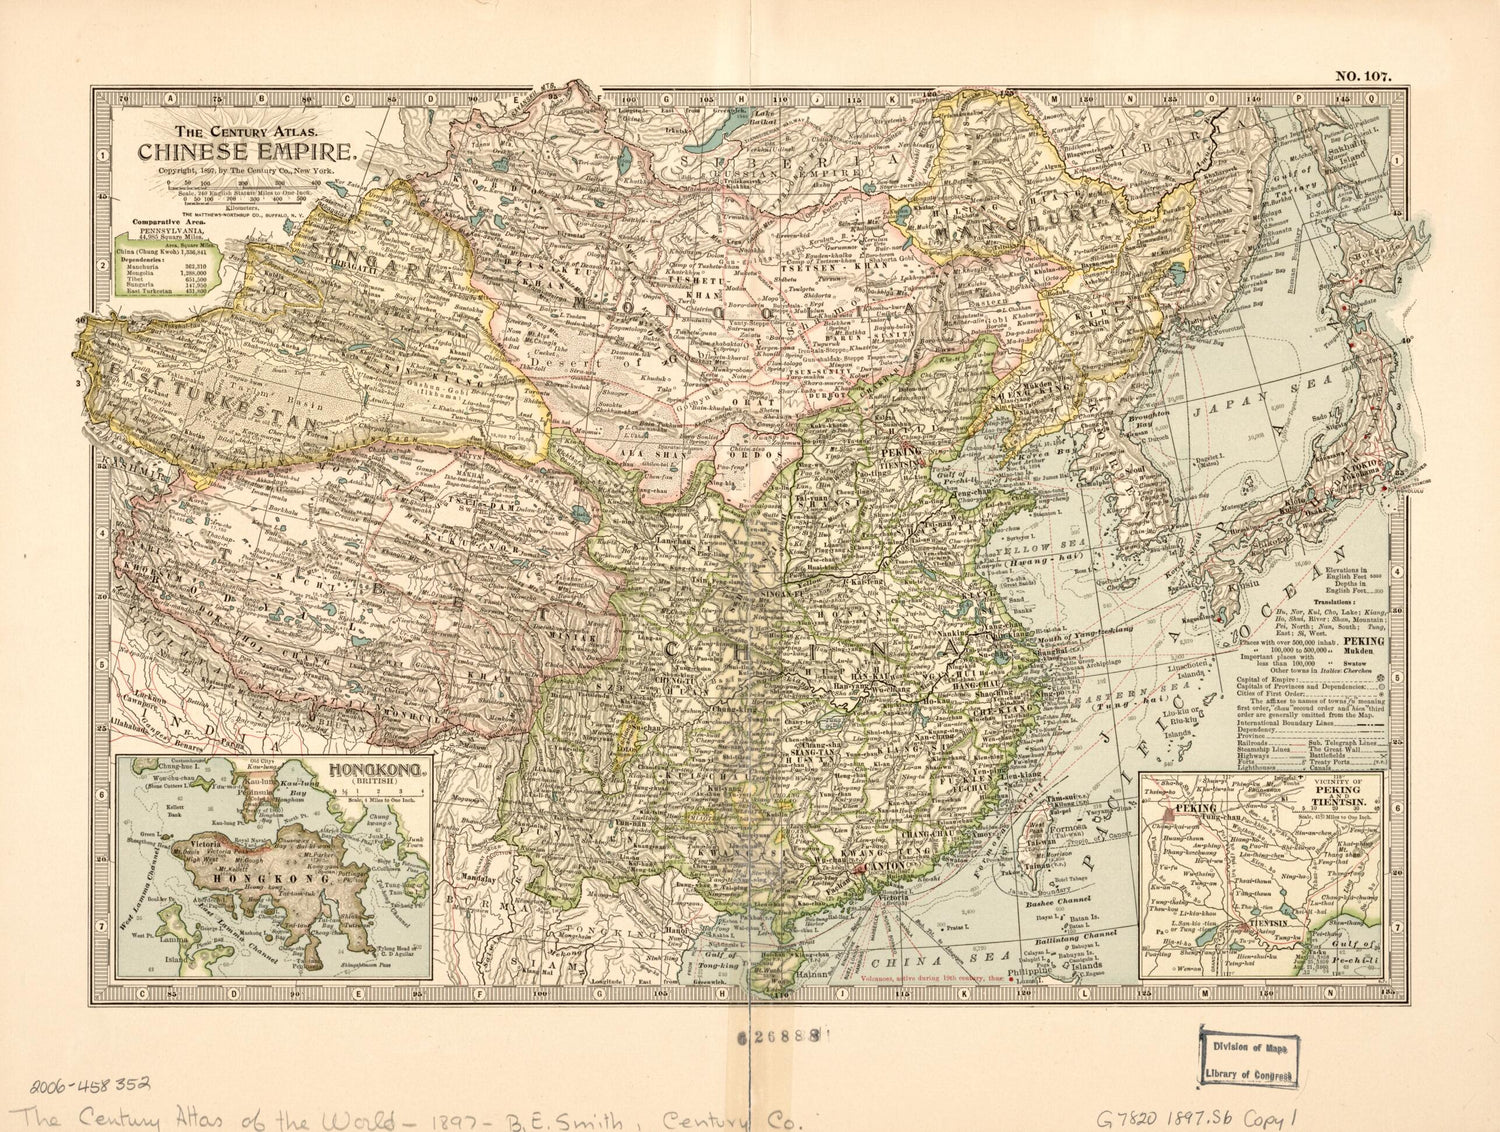 This old map of The Century Atlas, Chinese Empire (Chinese Empire) from 1897 was created by Benjamin E. Smith in 1897